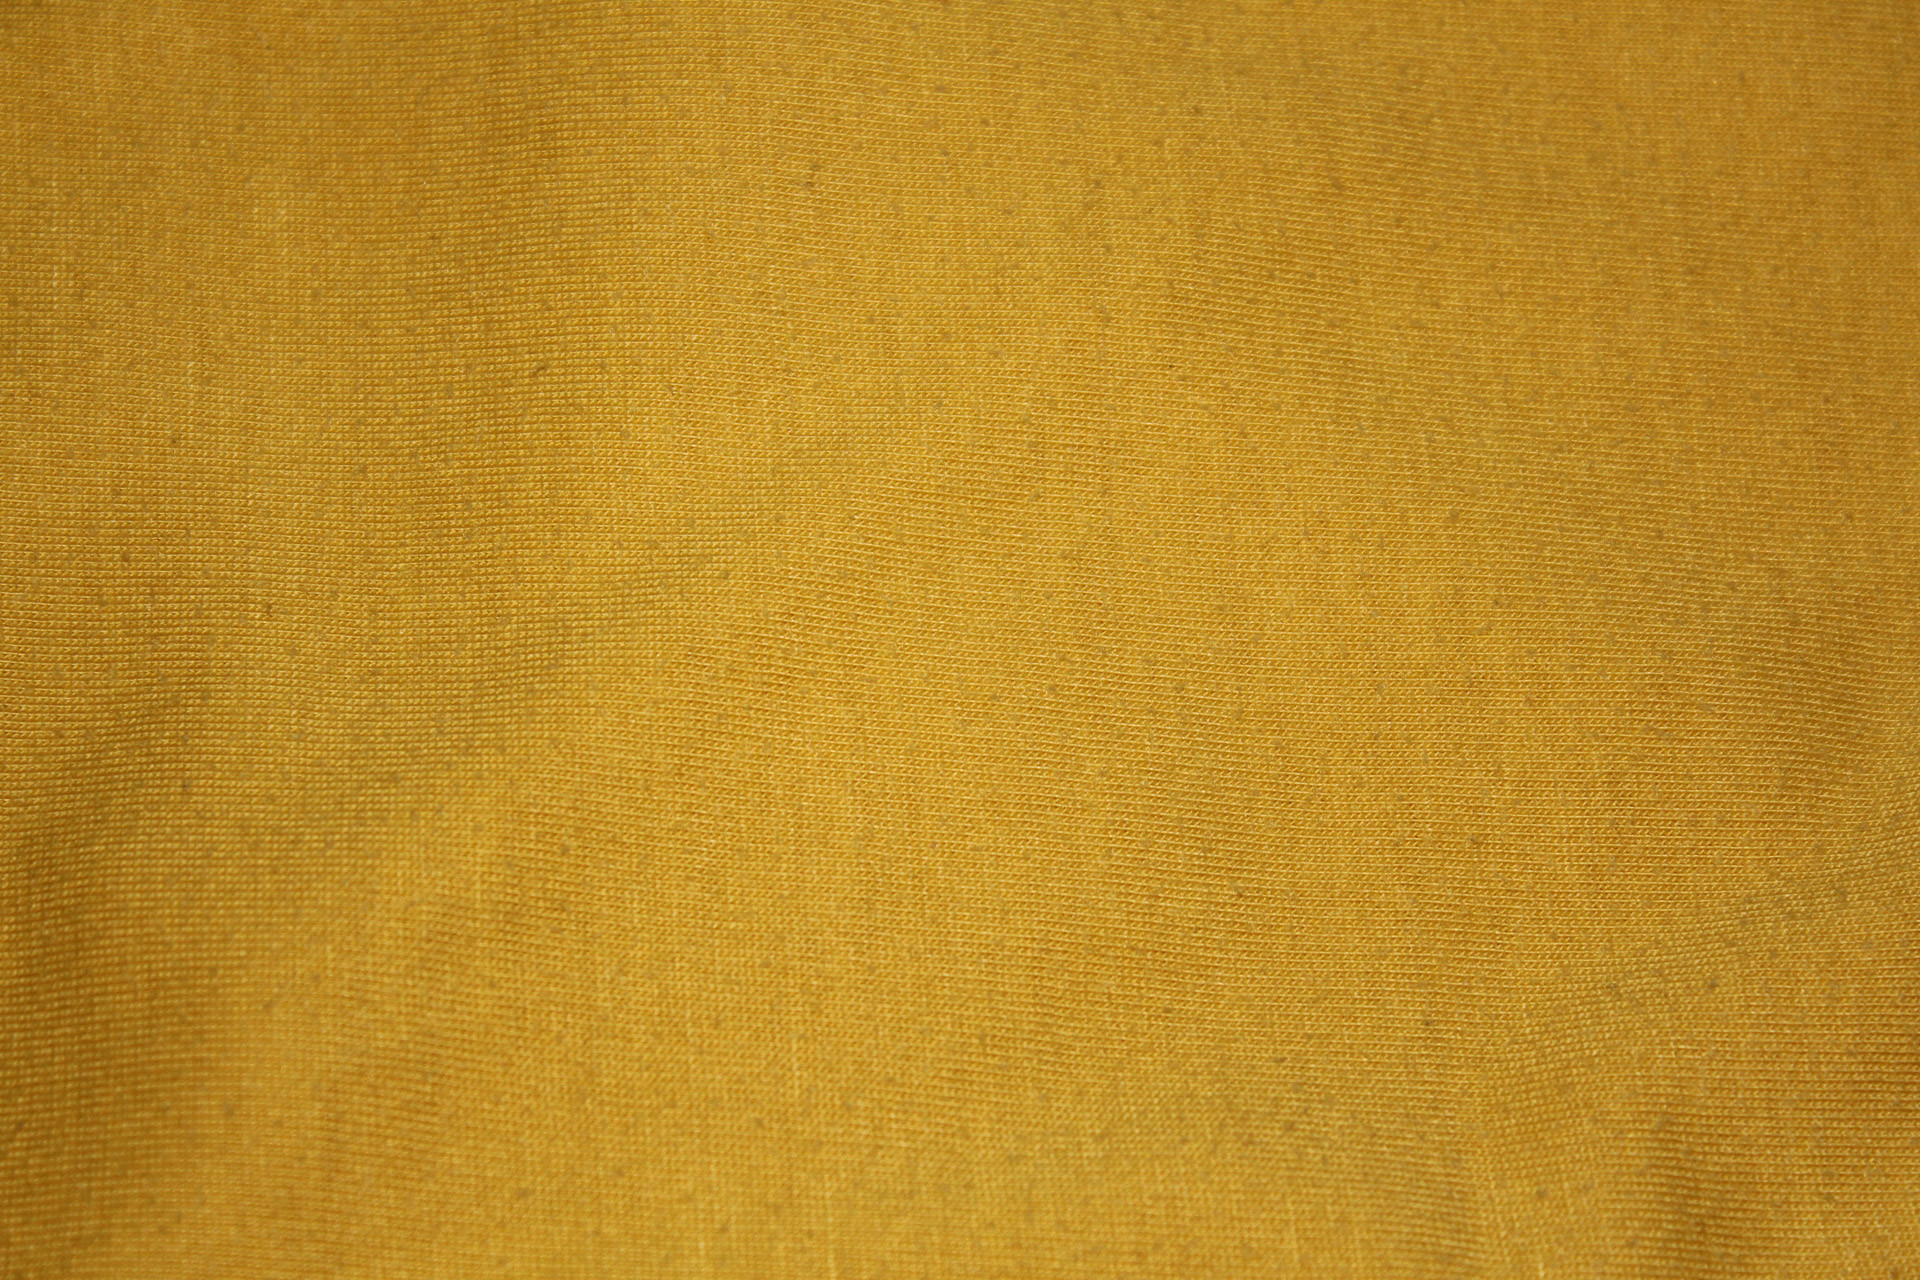 1920x1280 Yellow Gold Textile Background